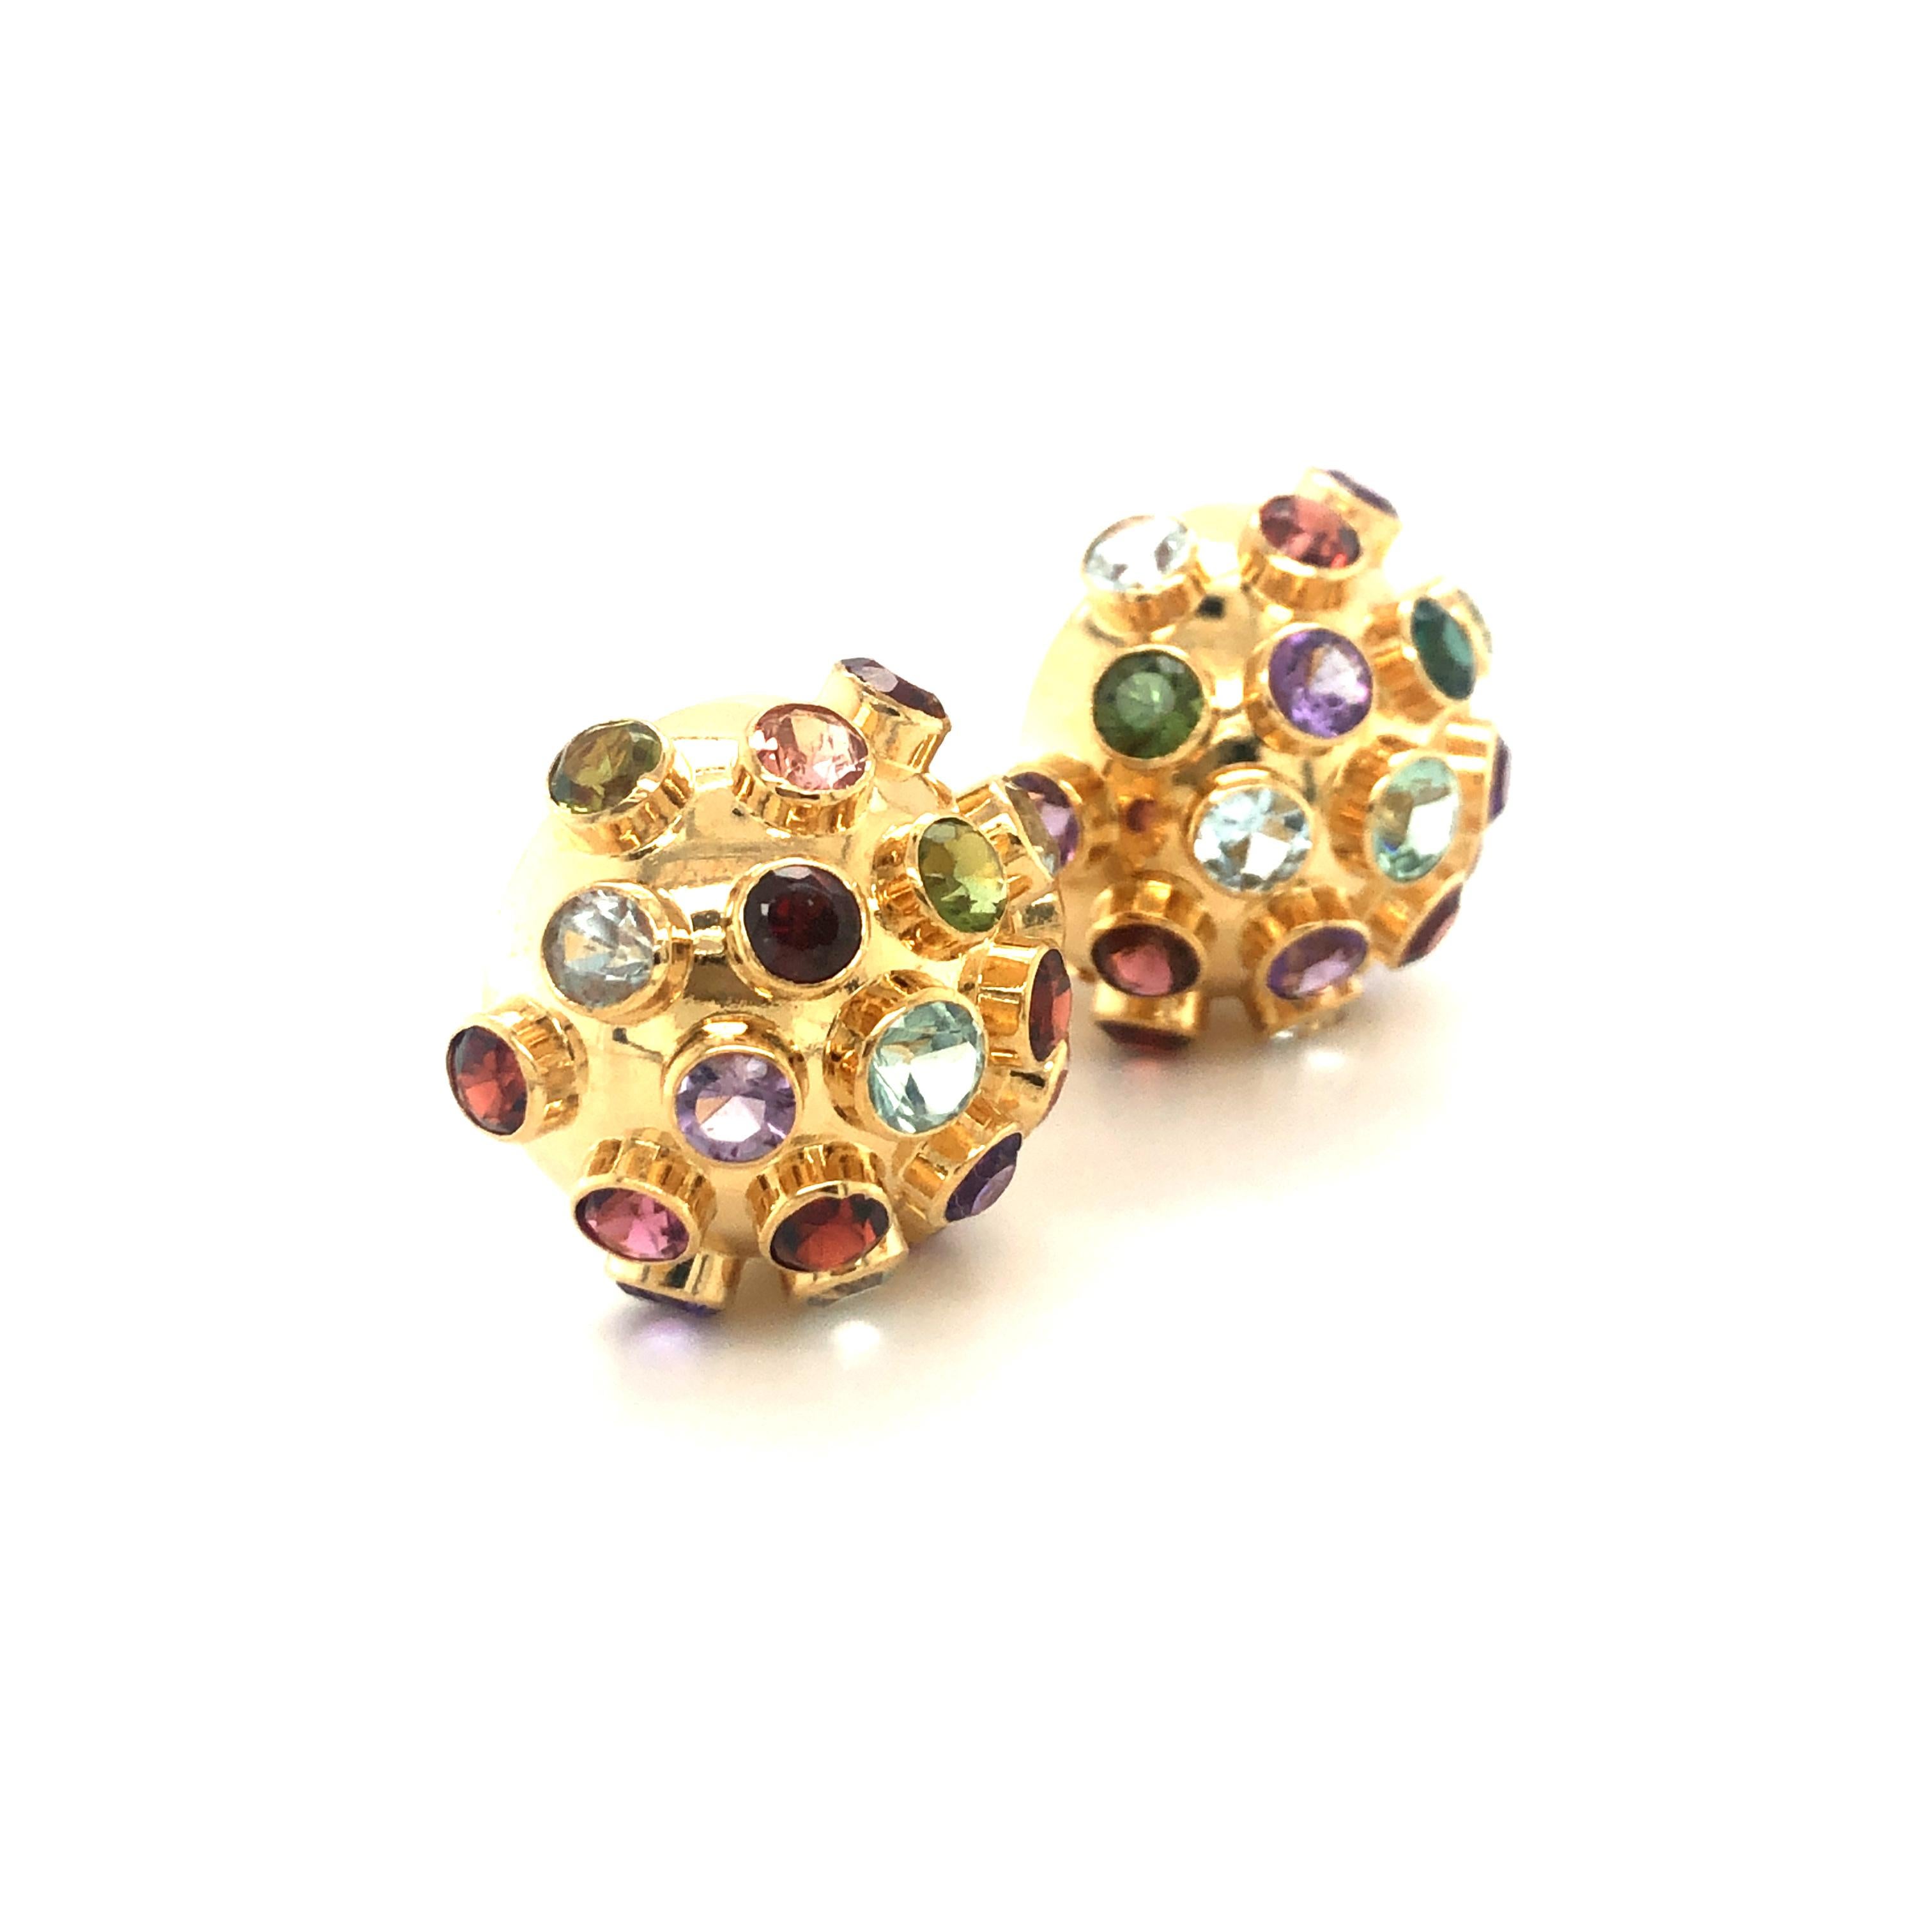 Retro H. Stern Sputnik Earclips with Colored Gemstones in 18 Karat Yellow Gold